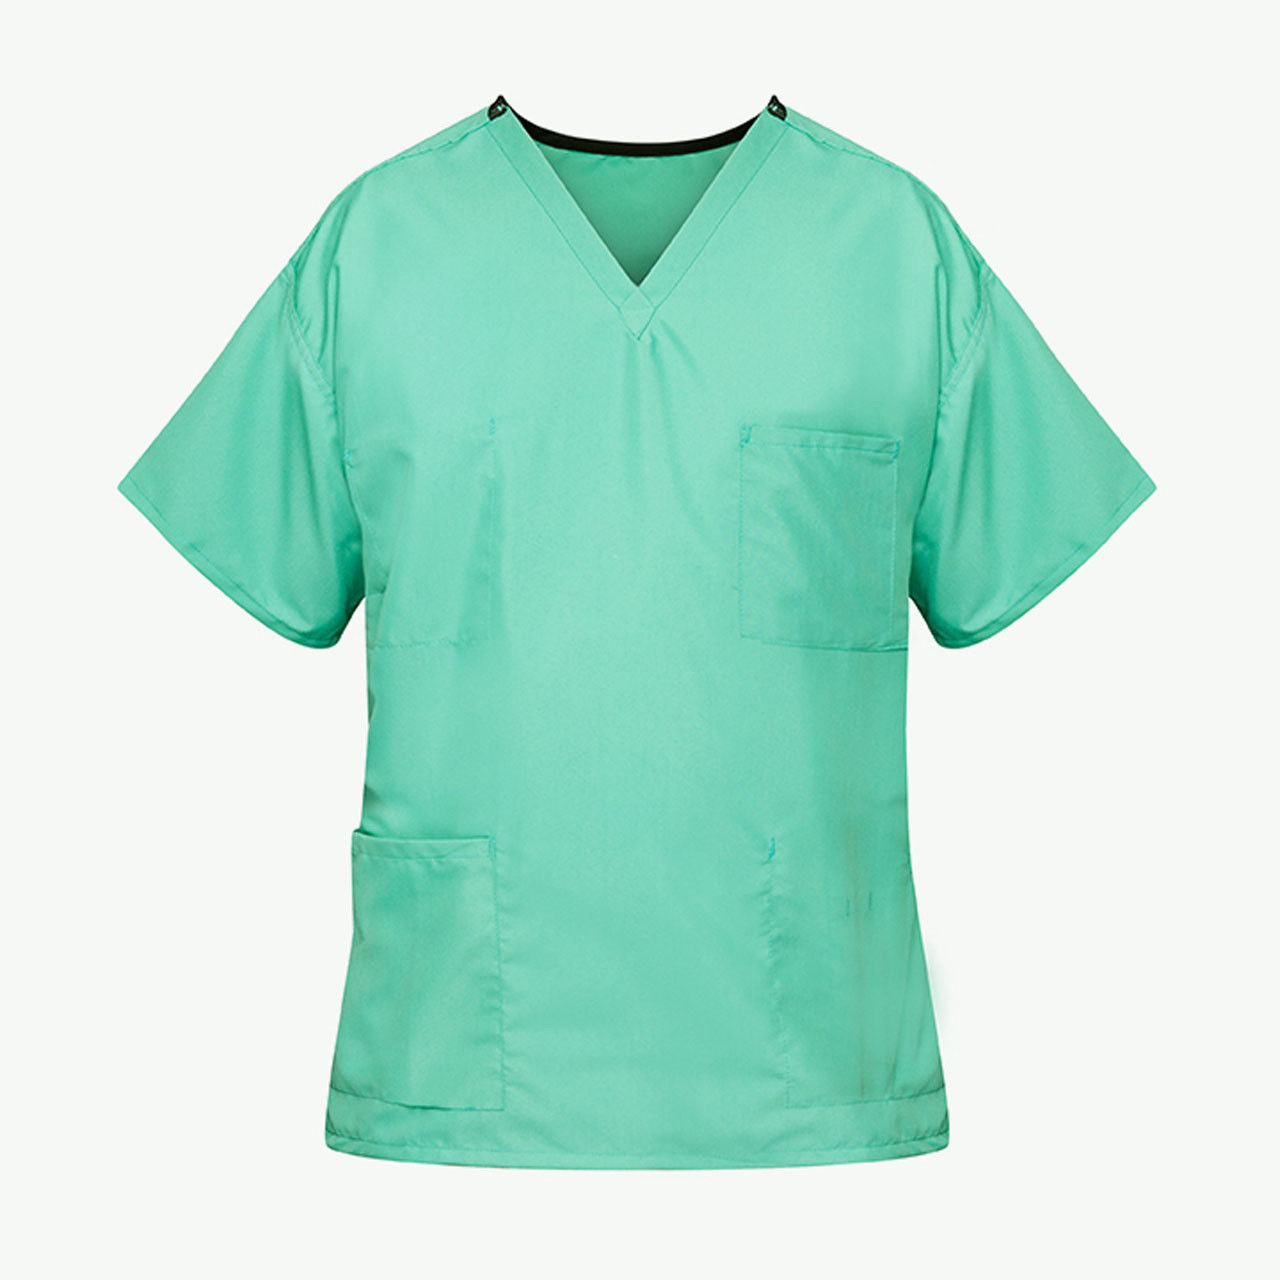 What is the method for determining the right size for jade green scrubs?